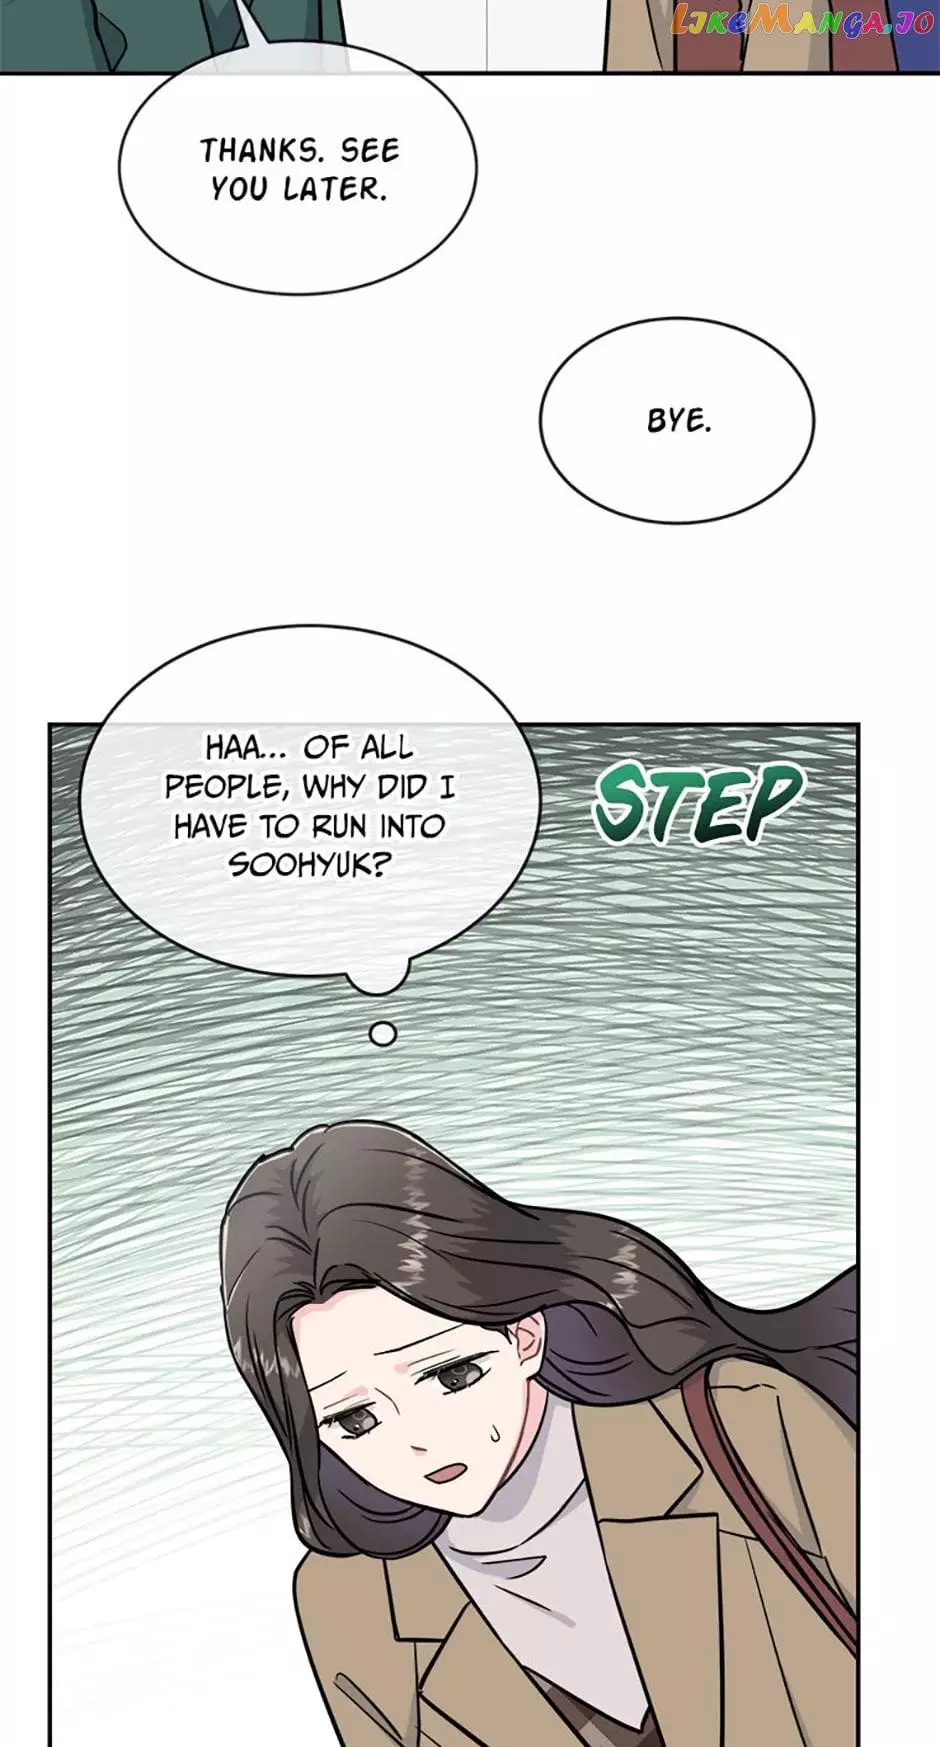 Don't Tempt Me, Oppa - 27 page 18-85c6acf6